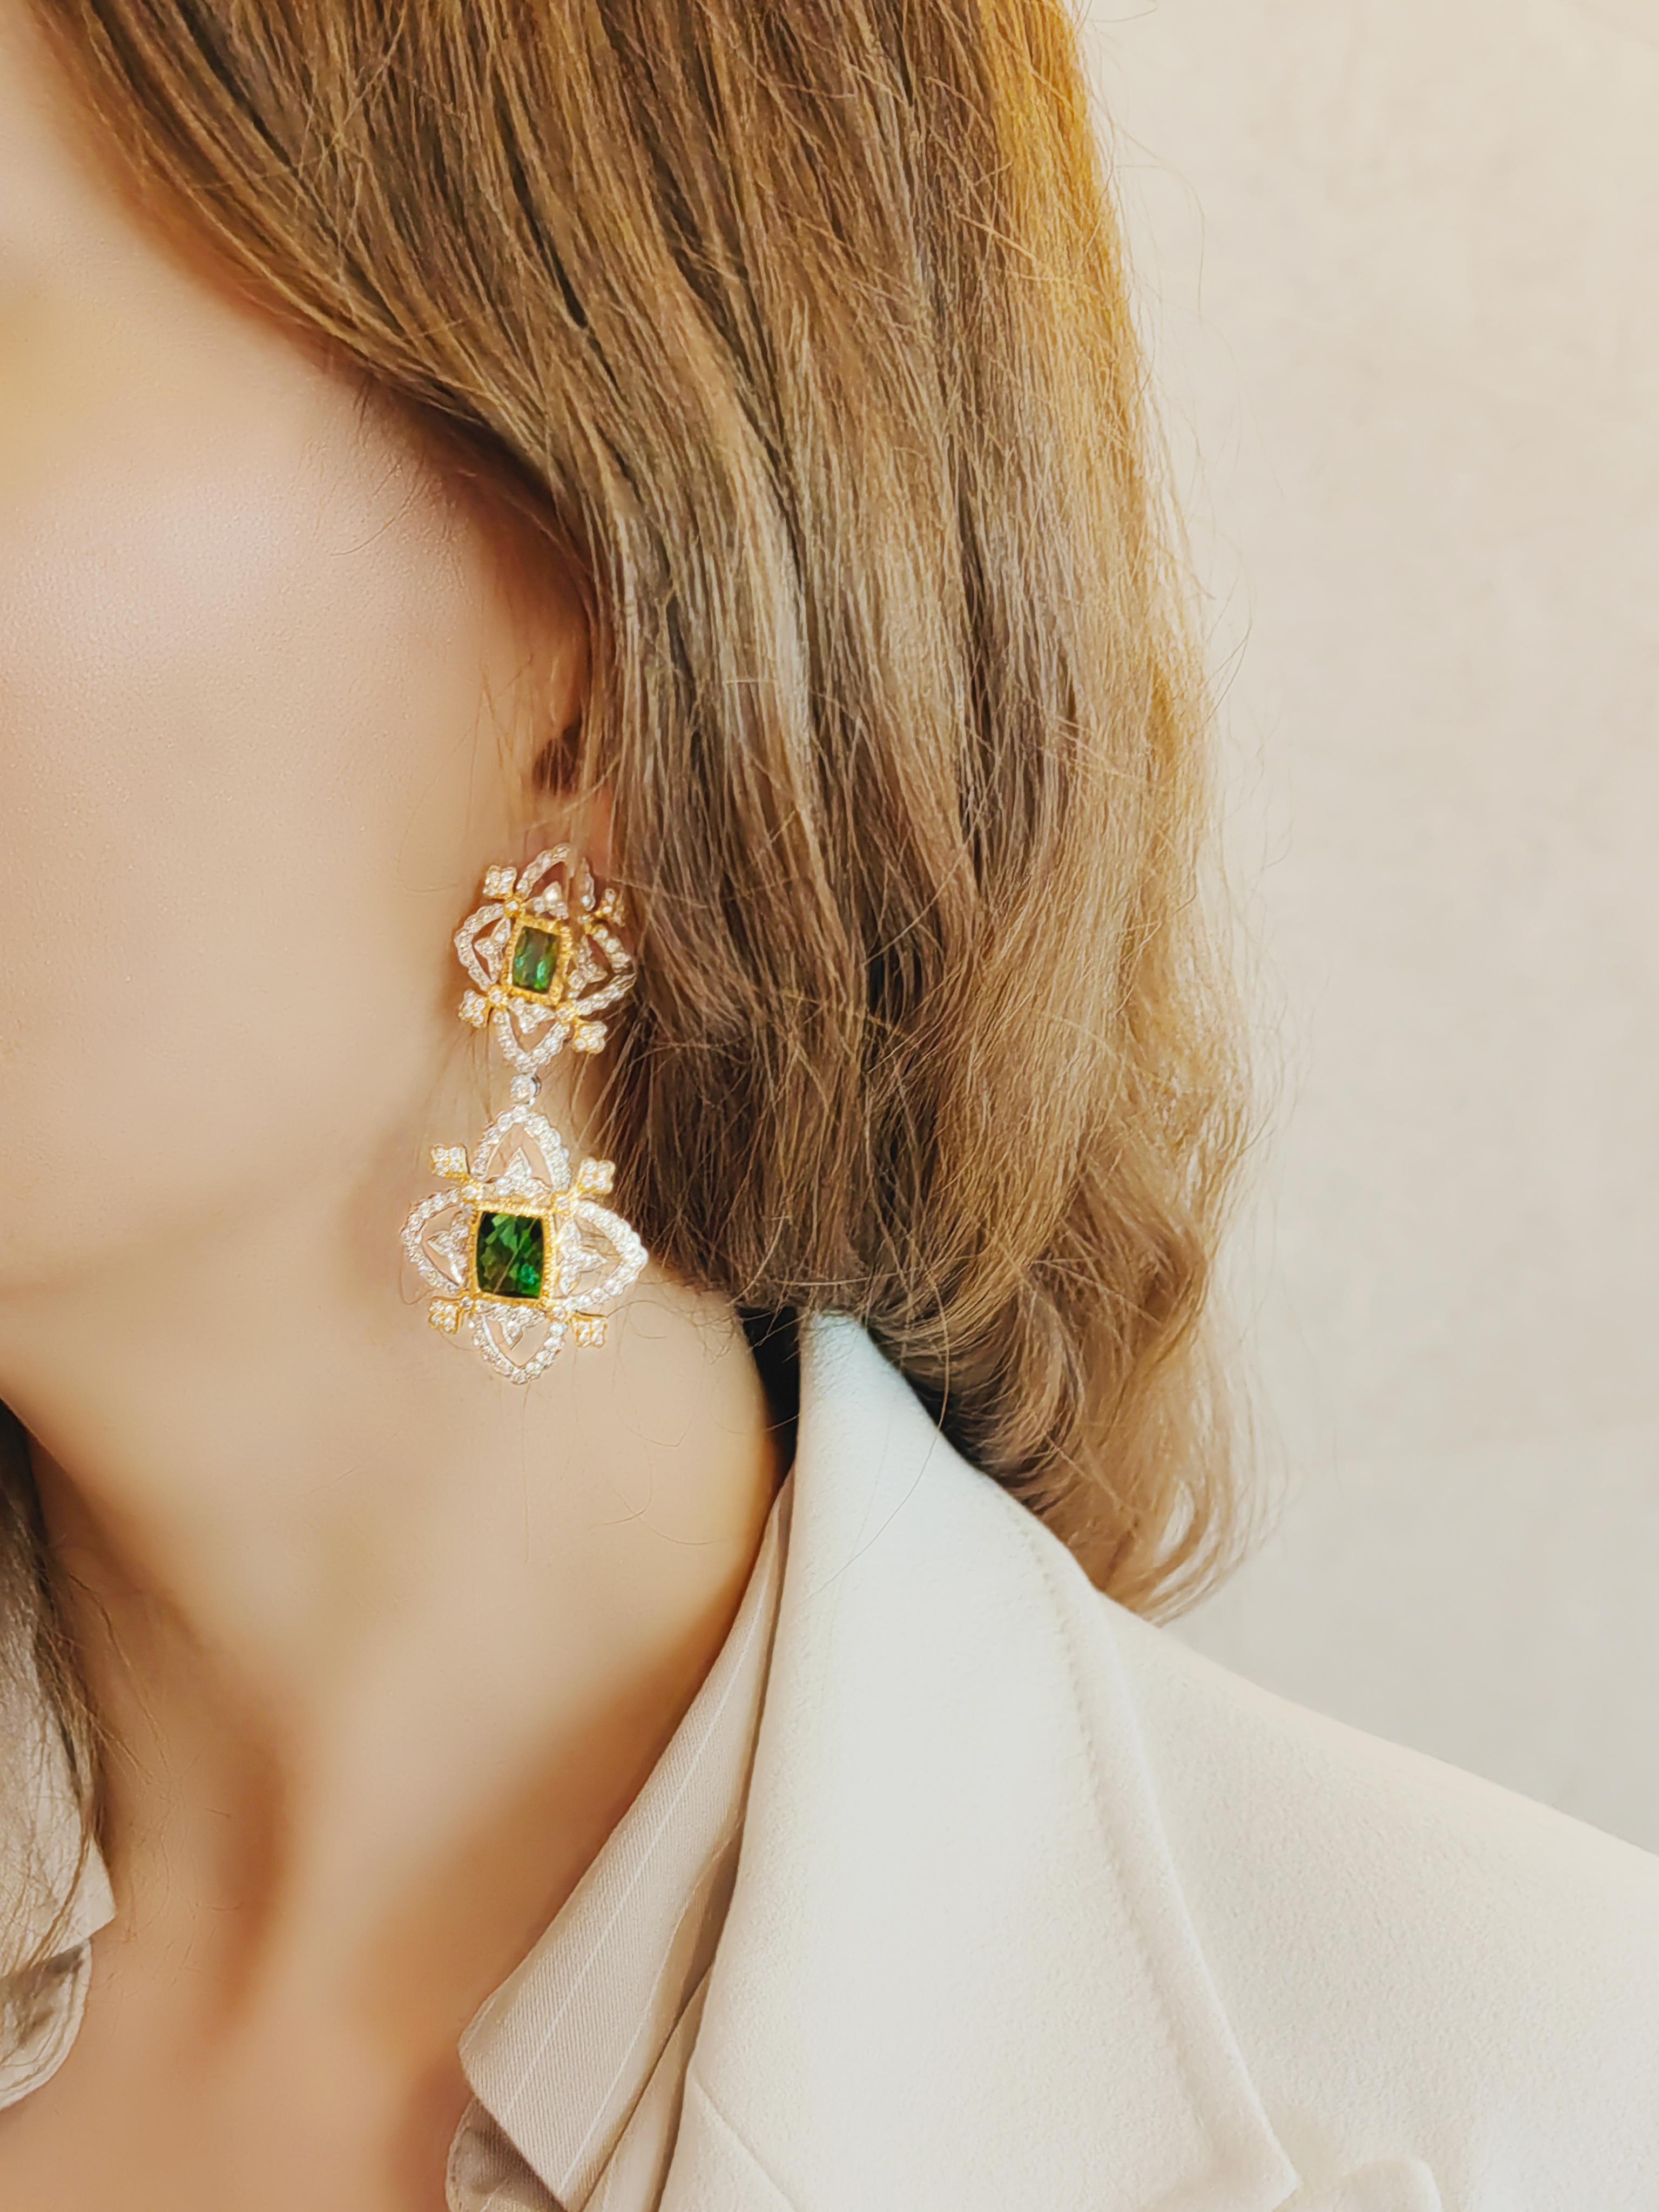 The best kind of statement earrings. These completely authentic earrings are a timeless classic that will age well and be cherished for generations. The unexpected curves, the exquisite cut pair of Afghan tourmalines, the elegantly executed hand